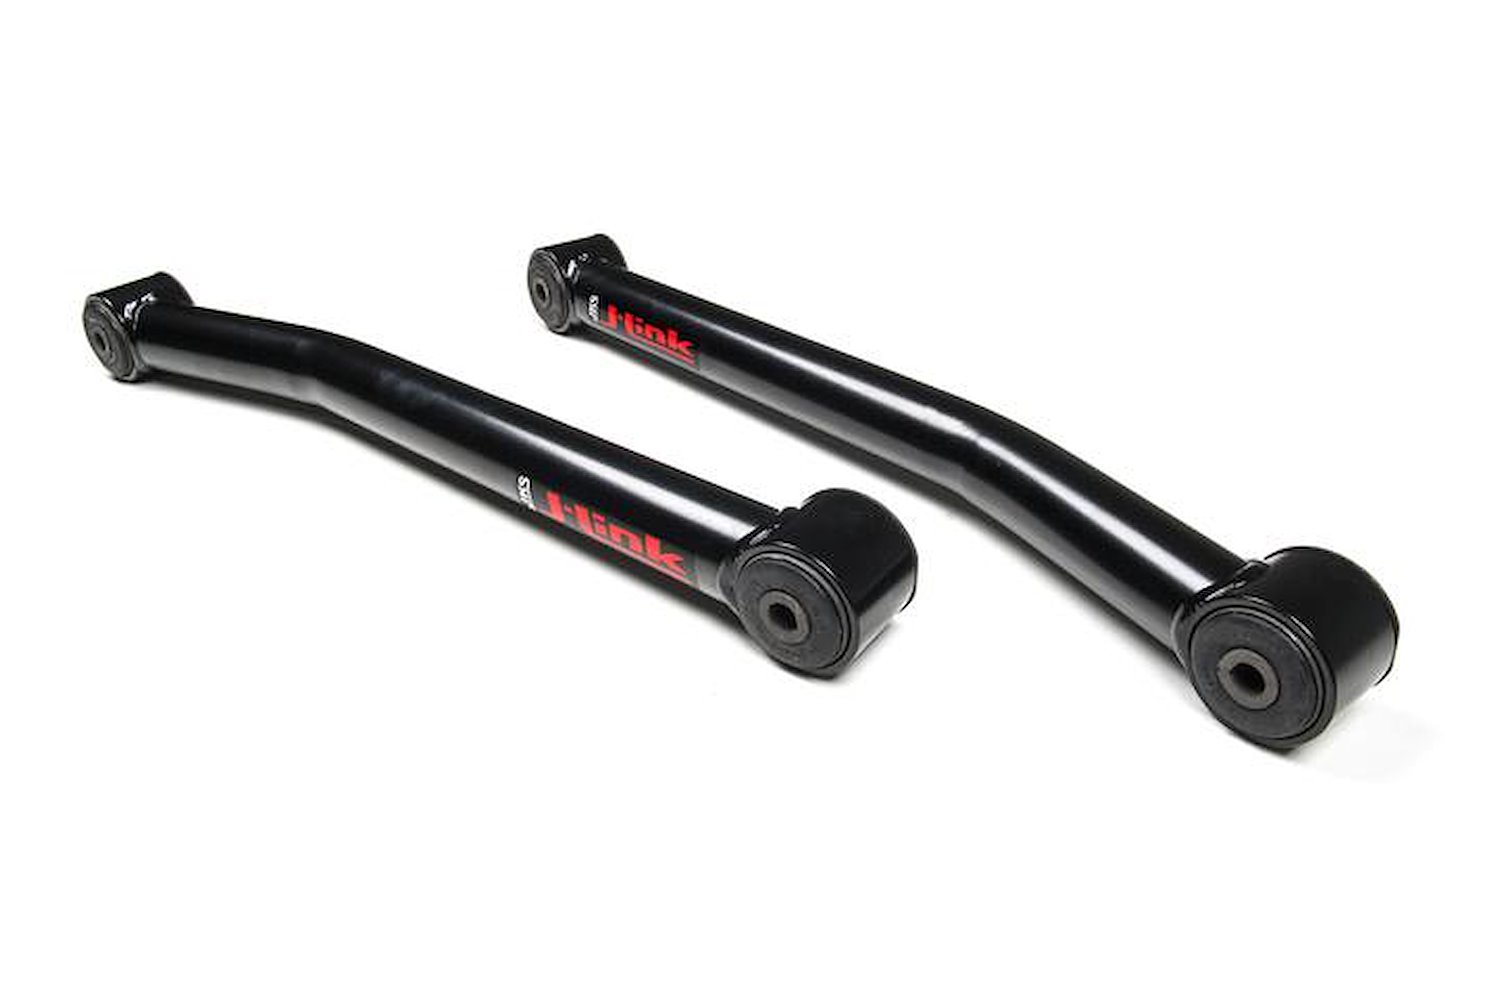 JKS1620 Fixed Length Control Arms, Jeep Wrangler JK Fixed Front